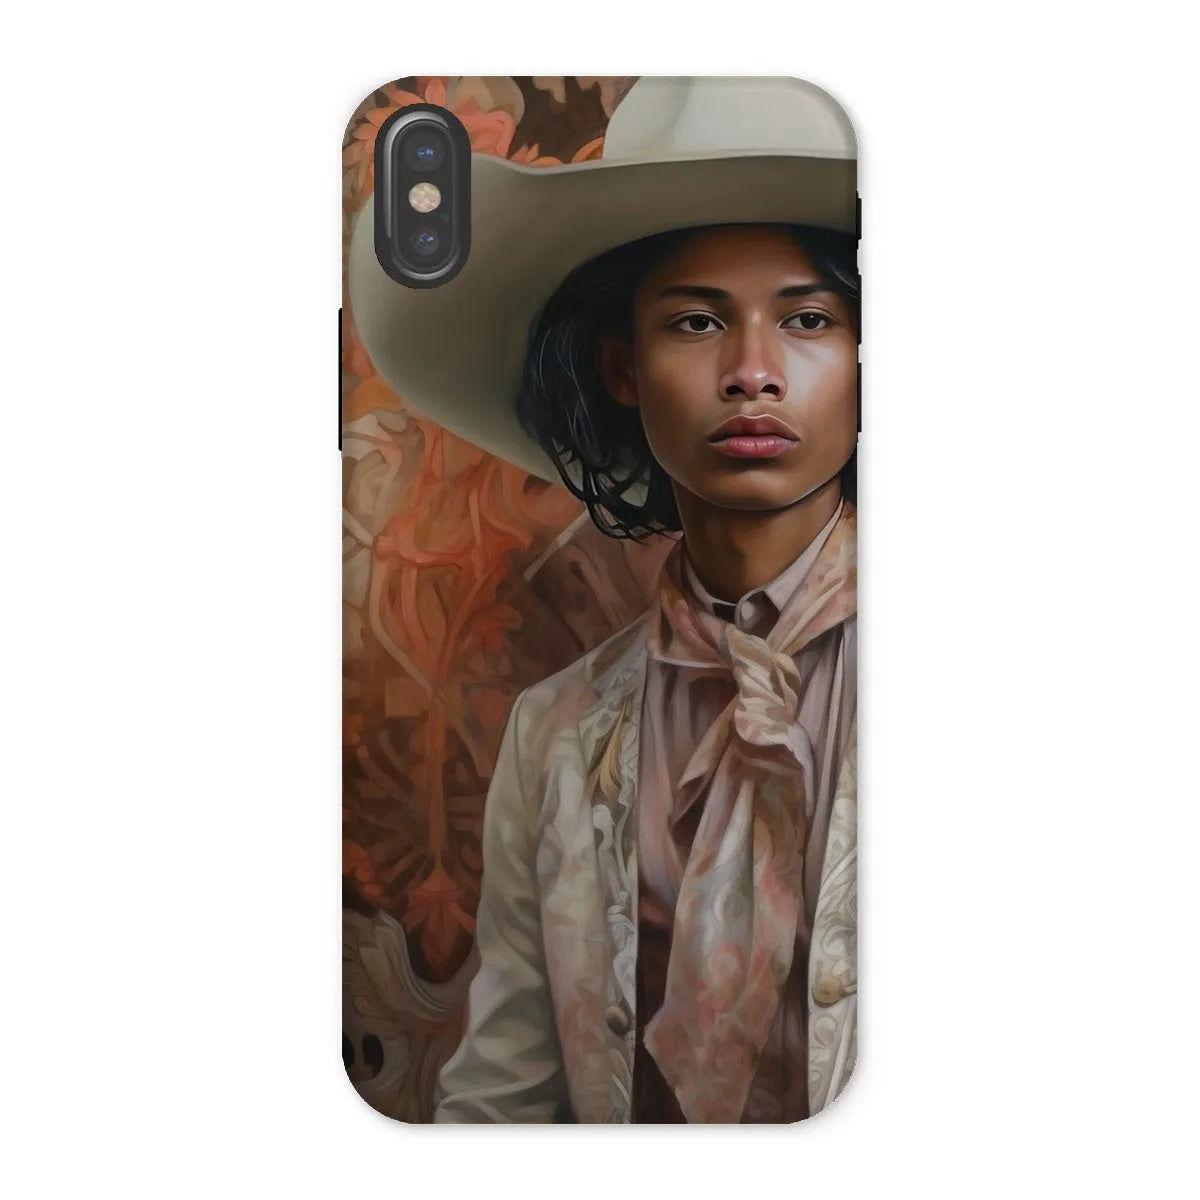 Arjuna The Gay Cowboy - Gay Aesthetic Art Phone Case - Iphone x / Matte - Mobile Phone Cases - Aesthetic Art